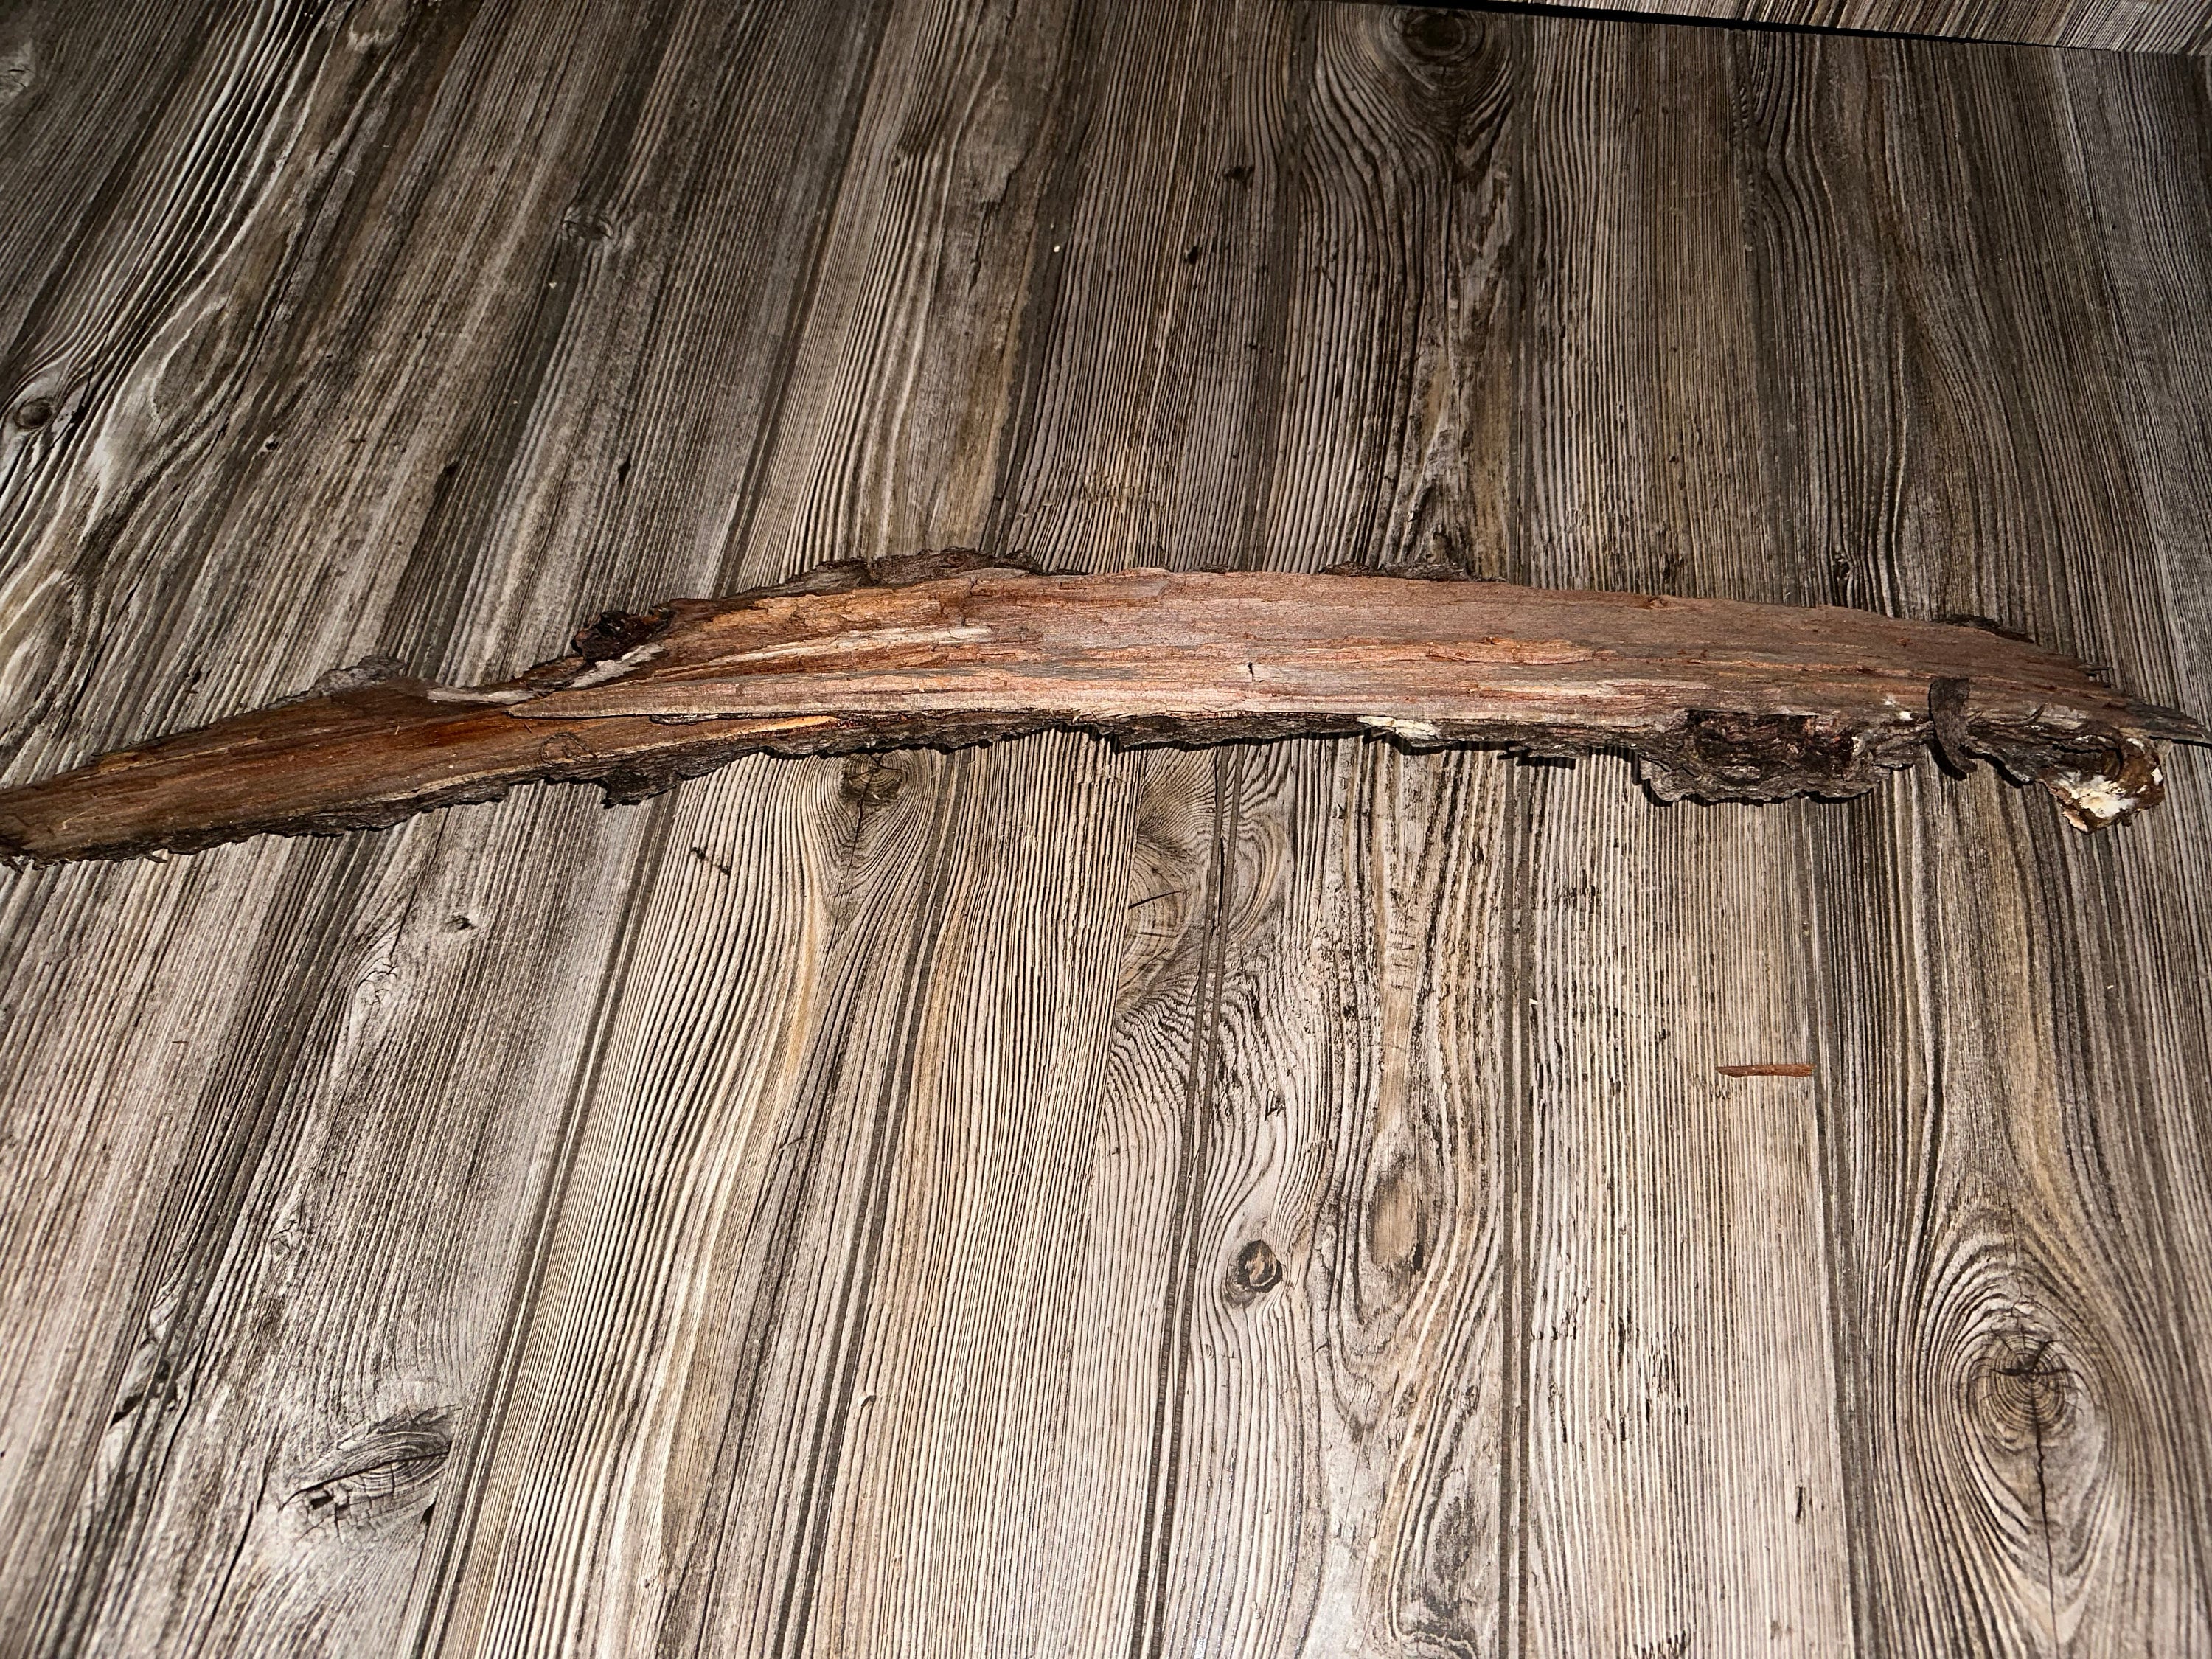 Tree Bark, Real Tree Bark, Approximately 31 Inches Long by 5 Inches Wide